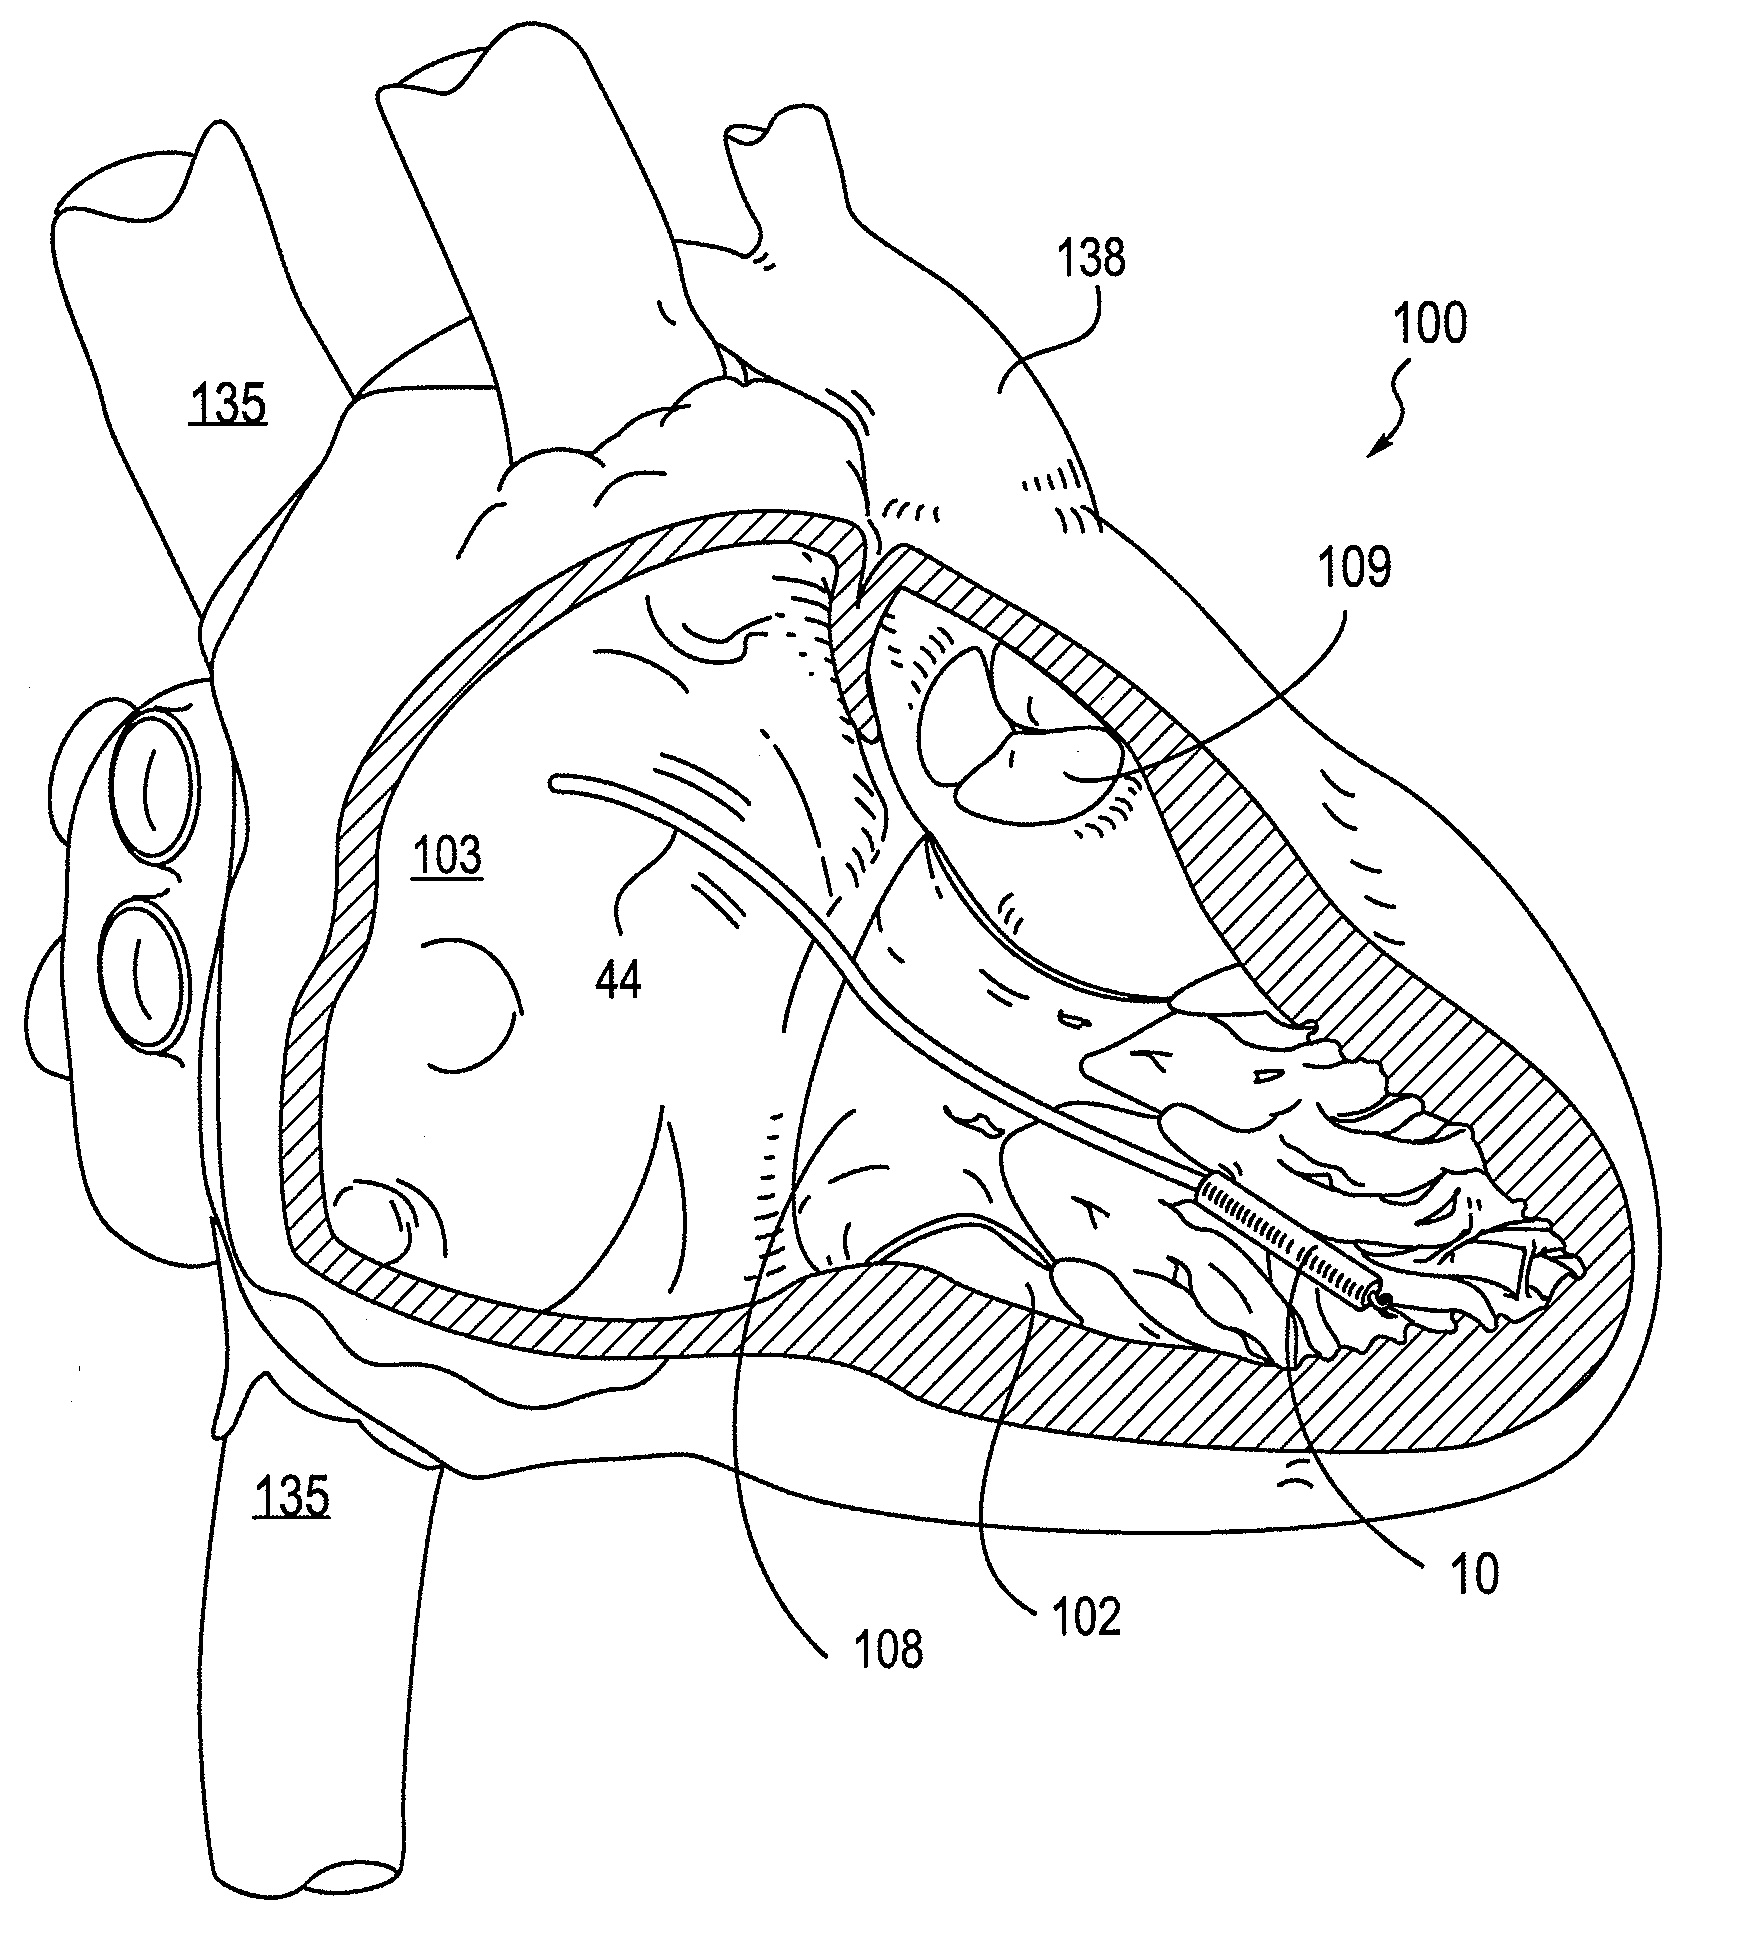 Leadless cardiac pacemaker with secondary fixation capability